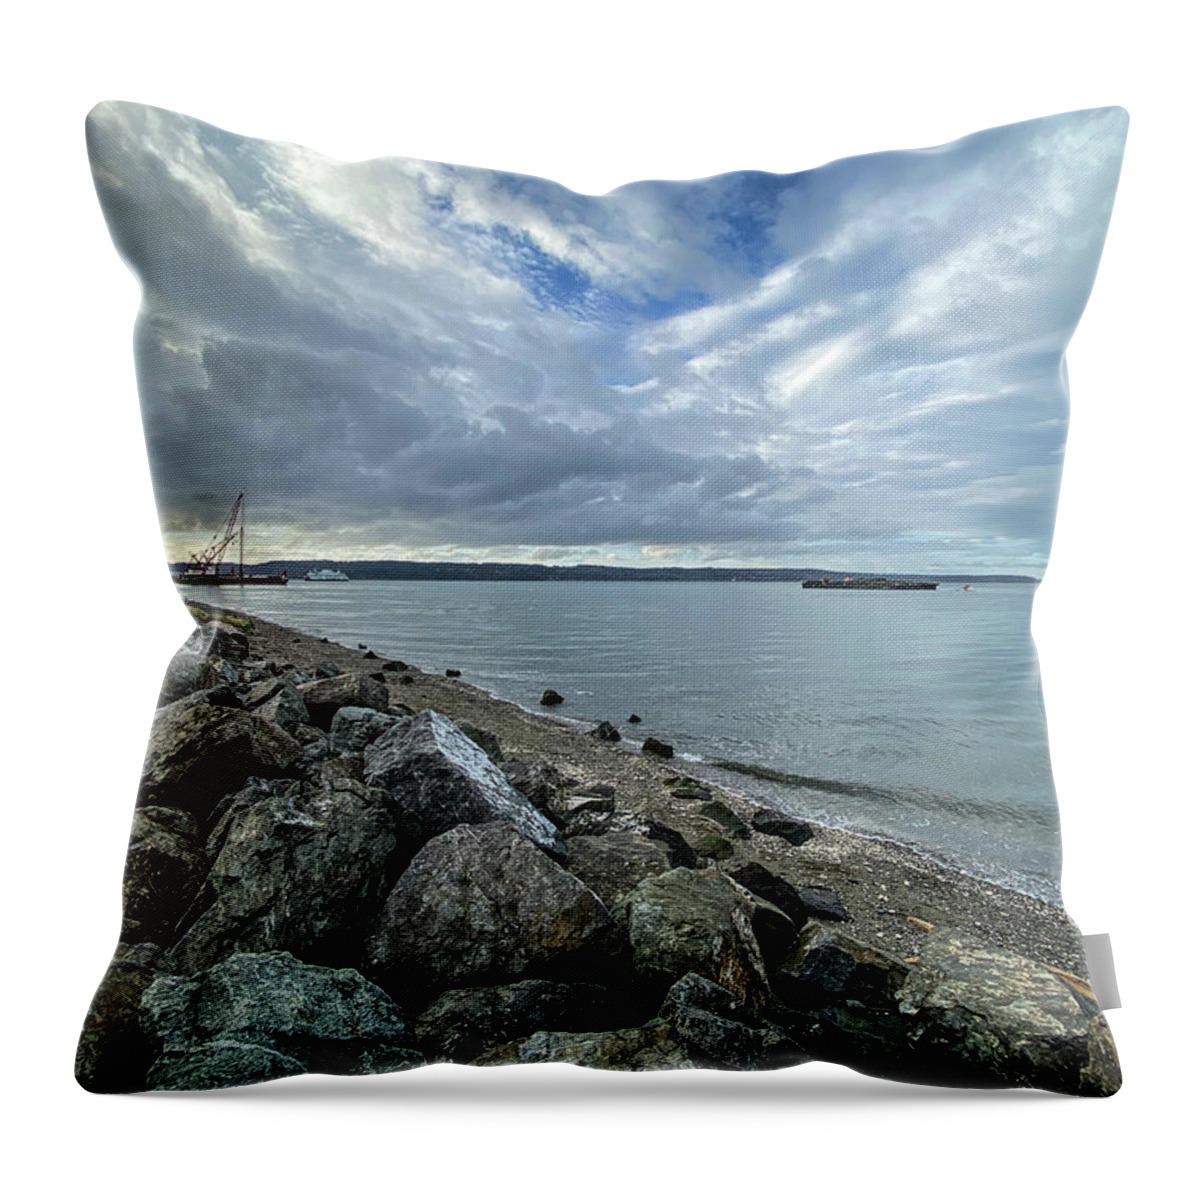 Park Throw Pillow featuring the photograph Seaside Park by Anamar Pictures